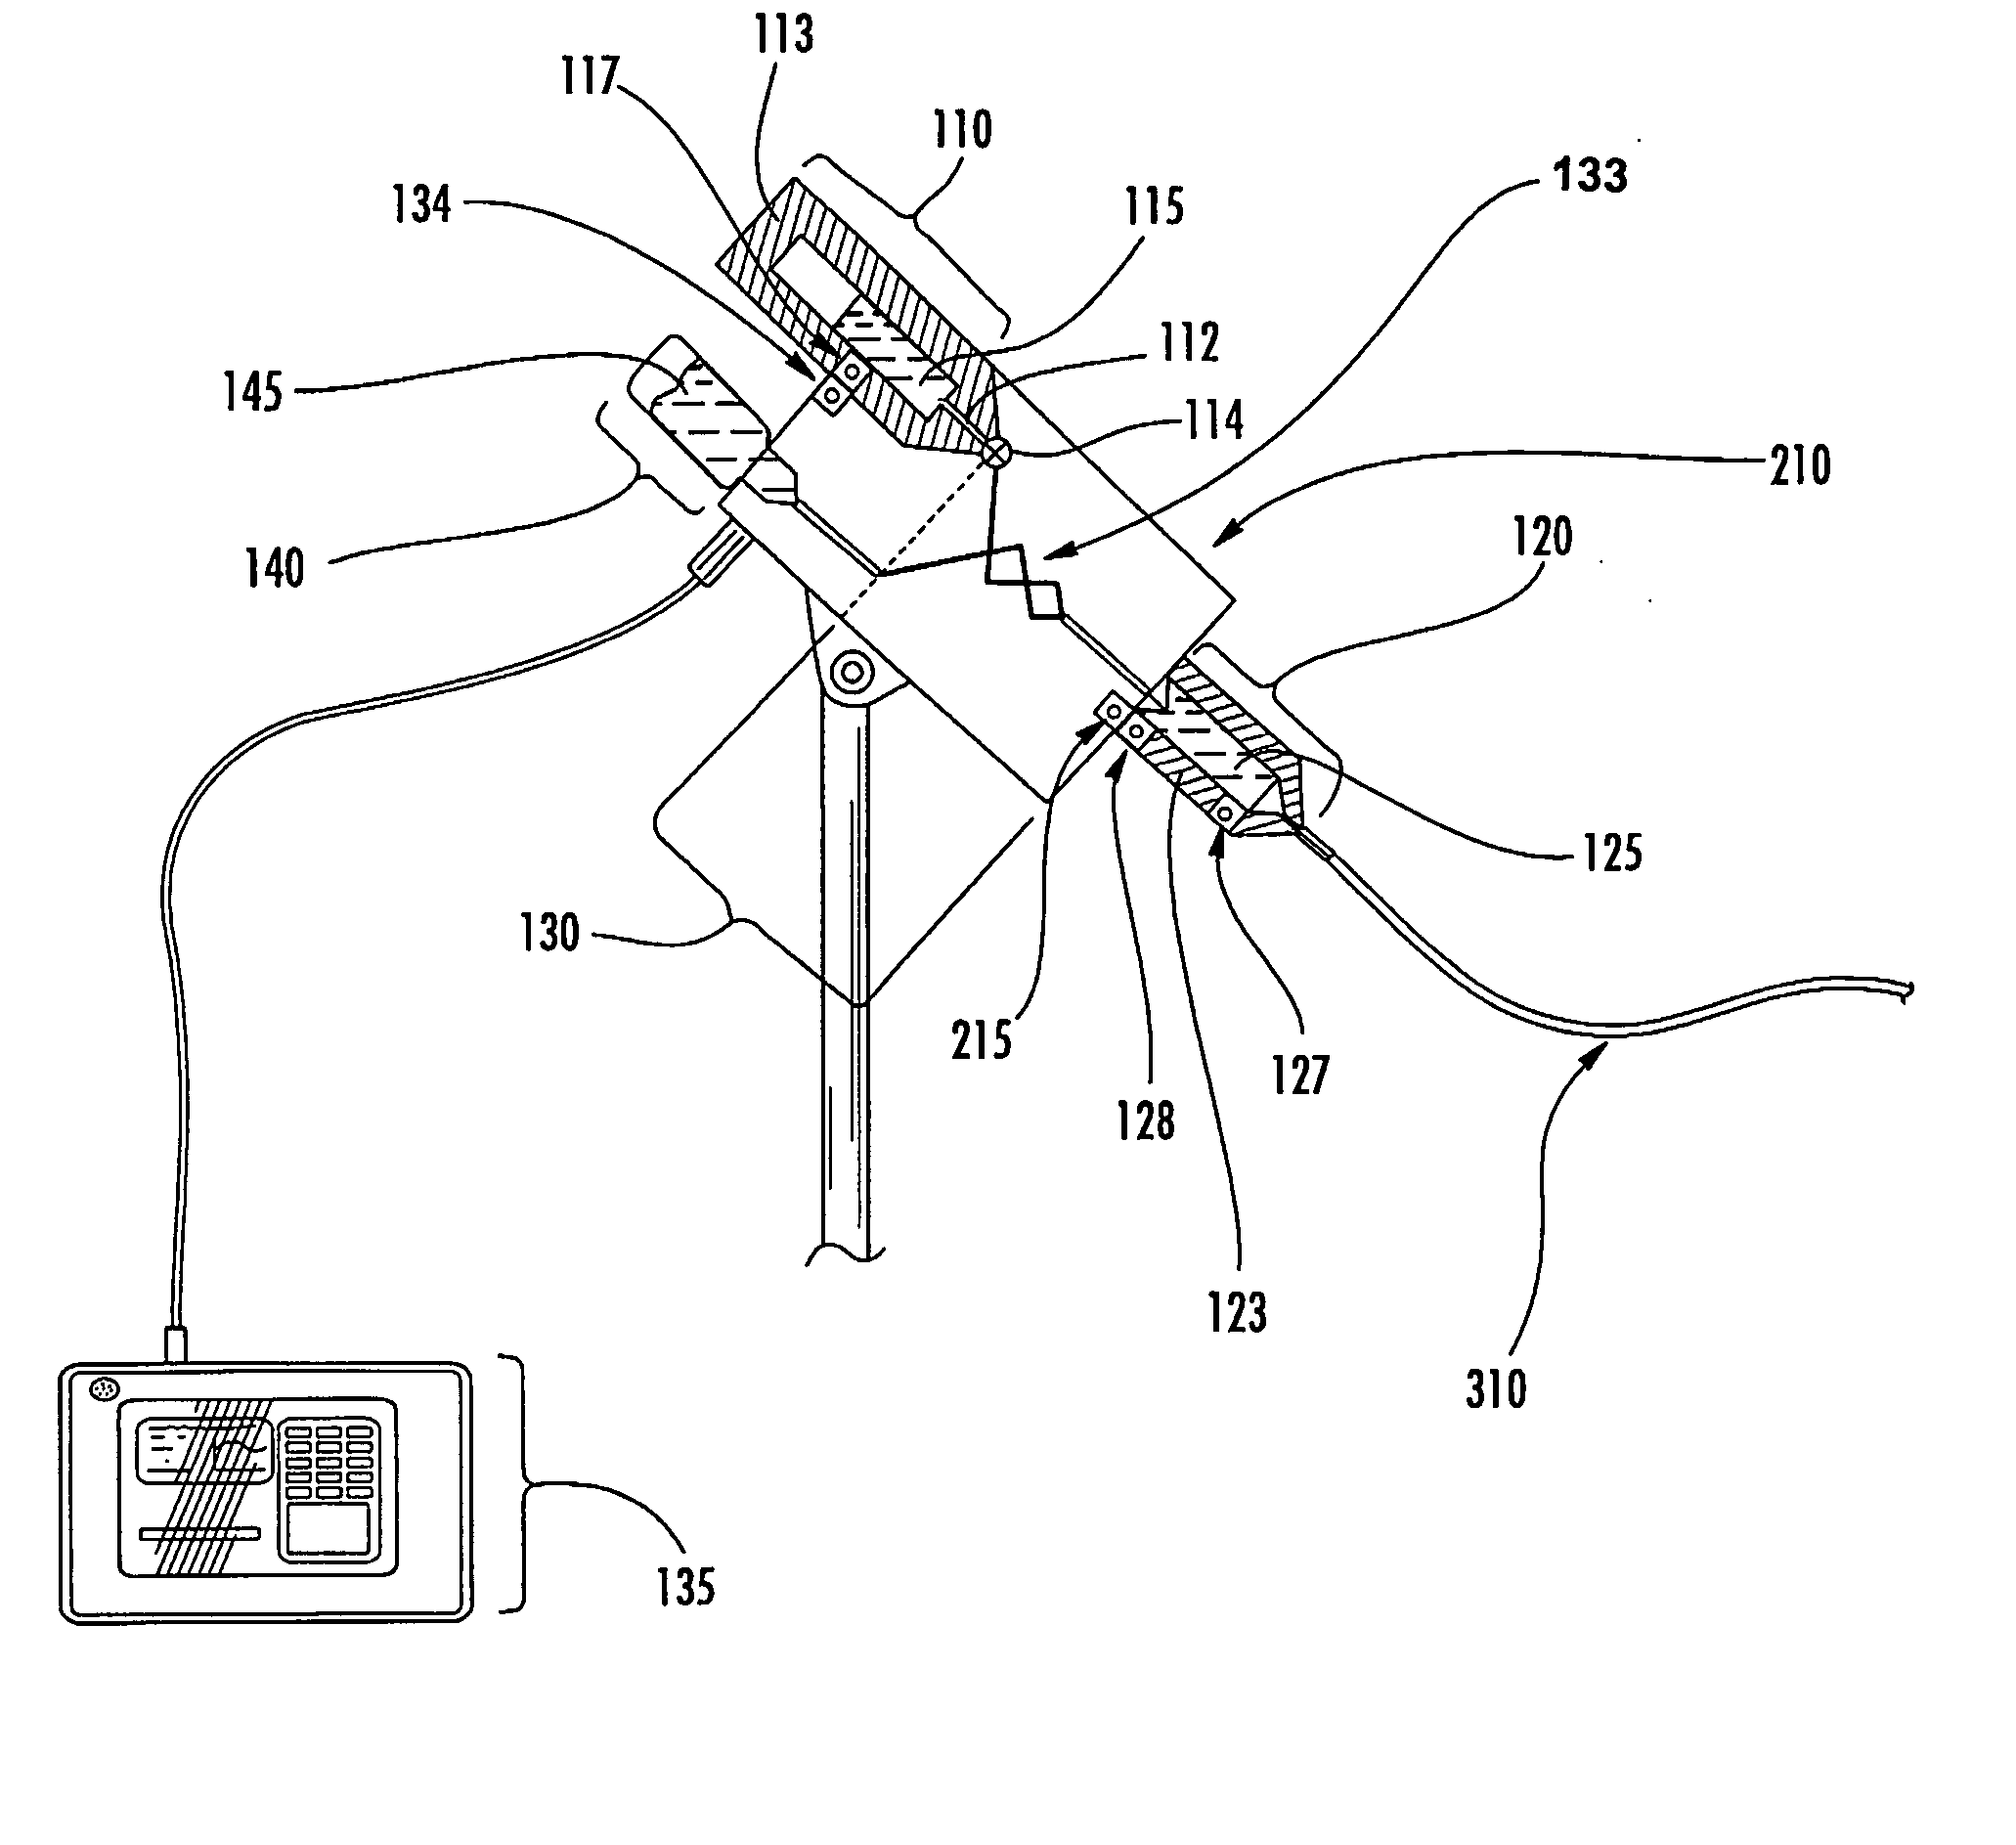 System, method, and computer program product for handling, mixing, dispensing, and injecting radiopharmaceutical agents